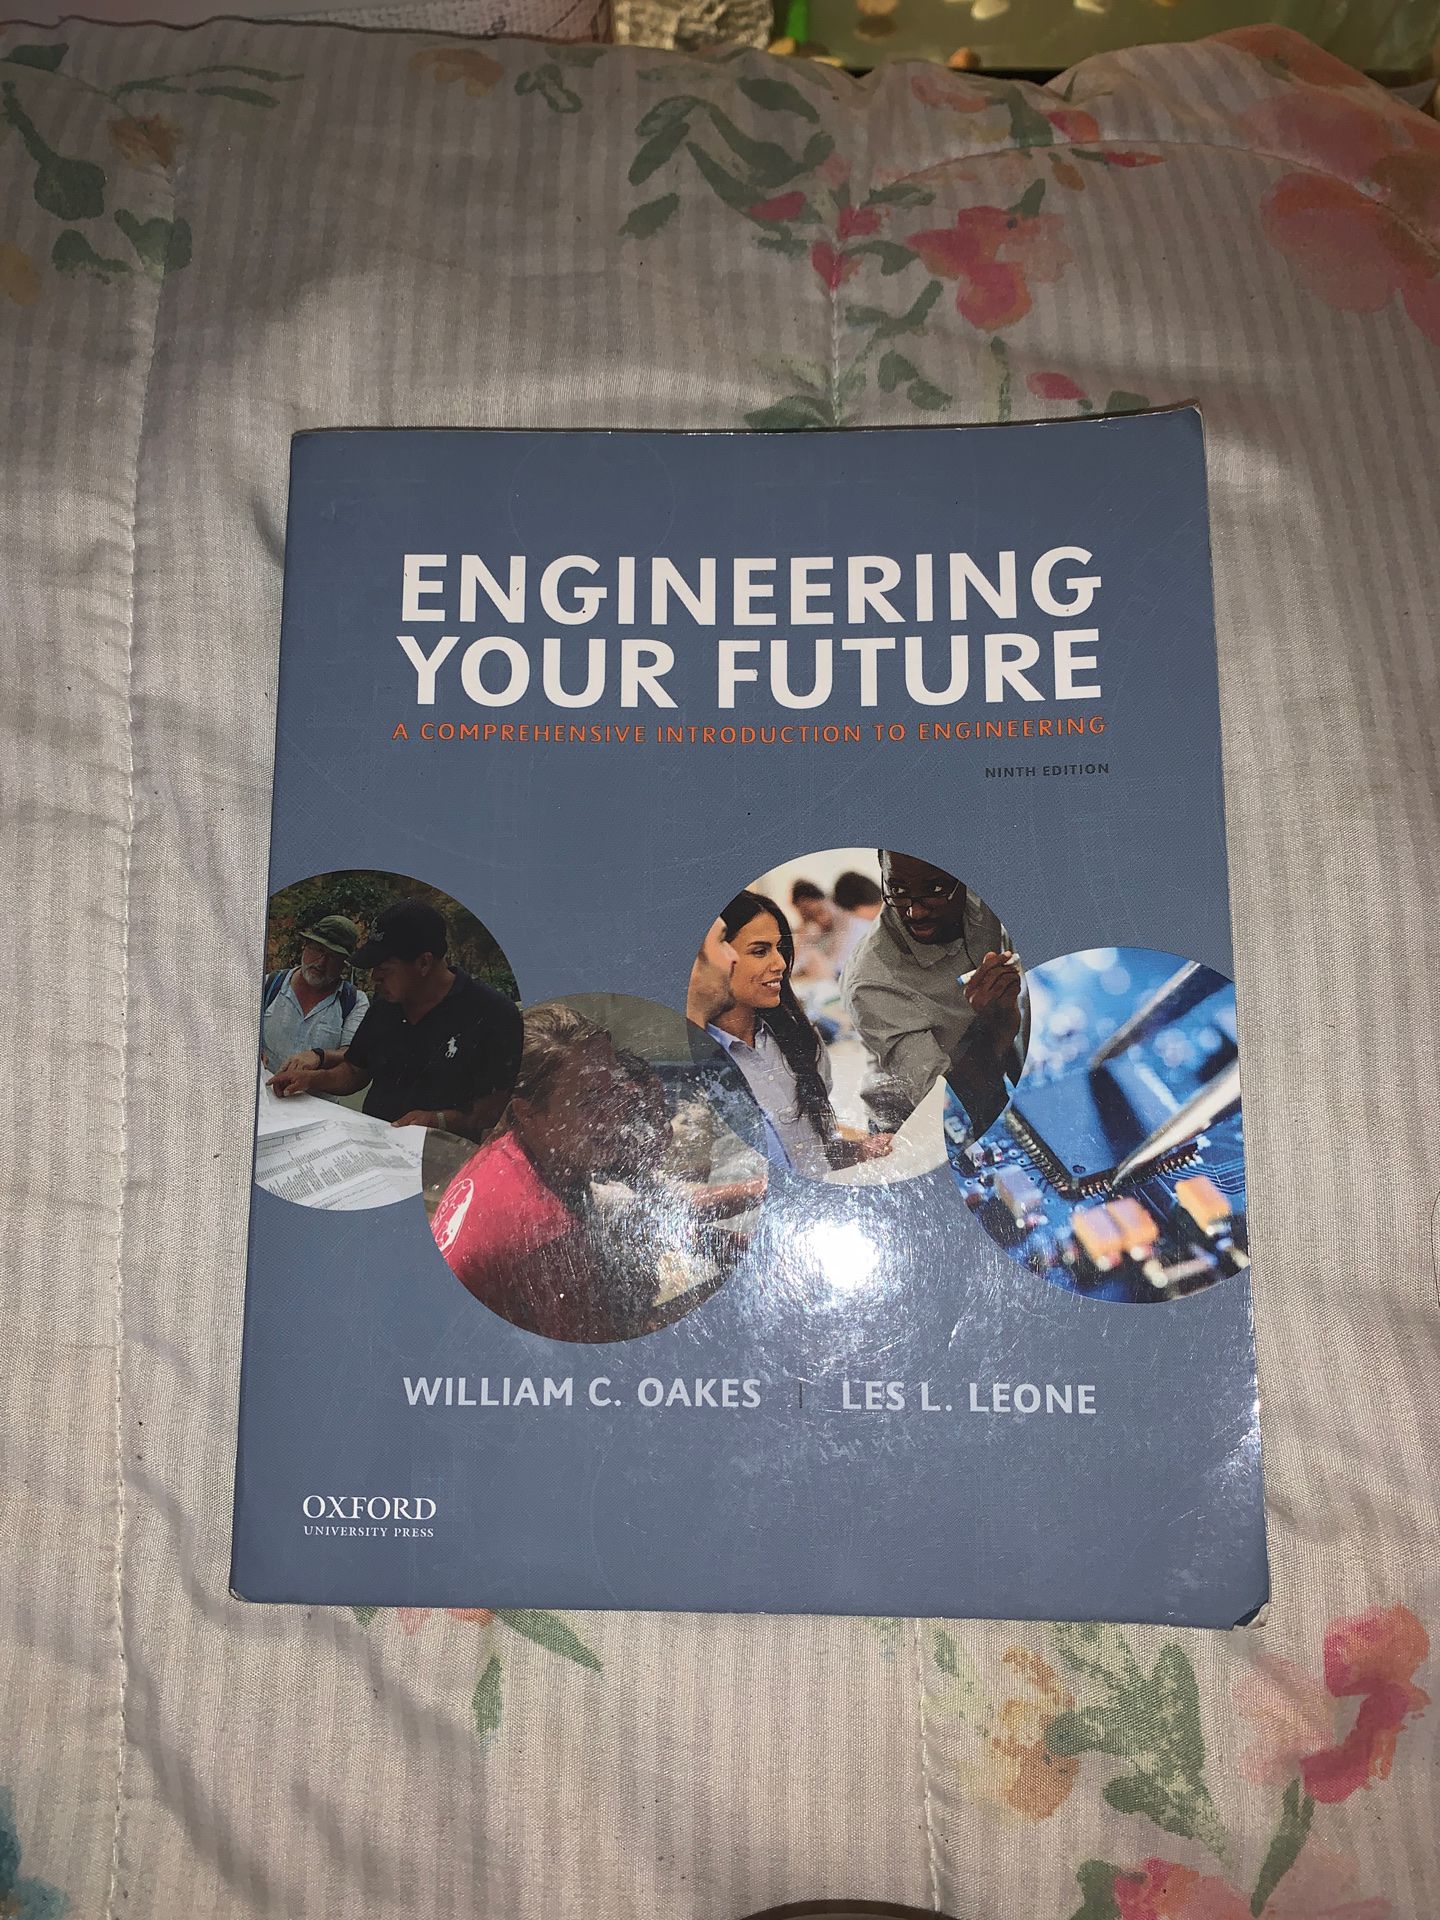 Engineering your future by Oakes and Leone